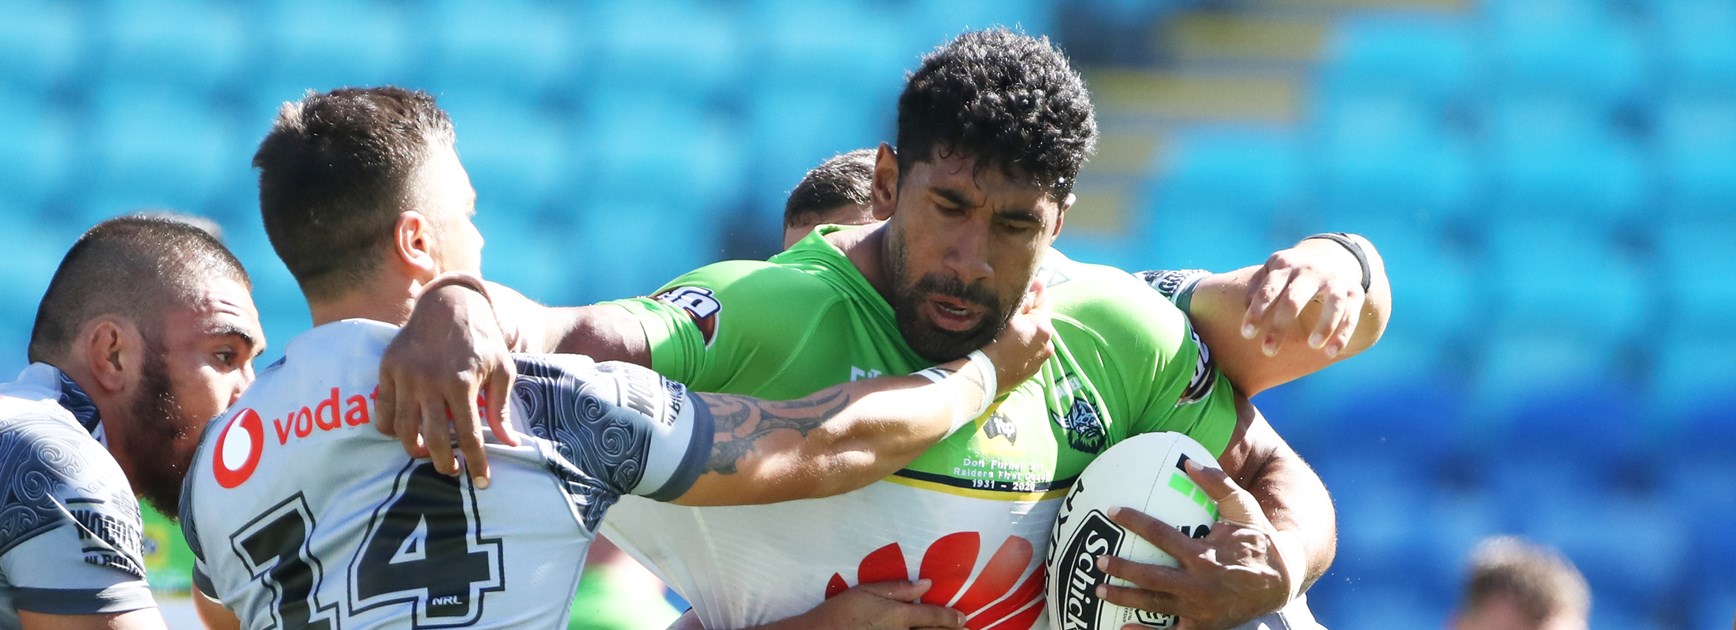 Judiciary: Sia Soliola charged for hit on Blair